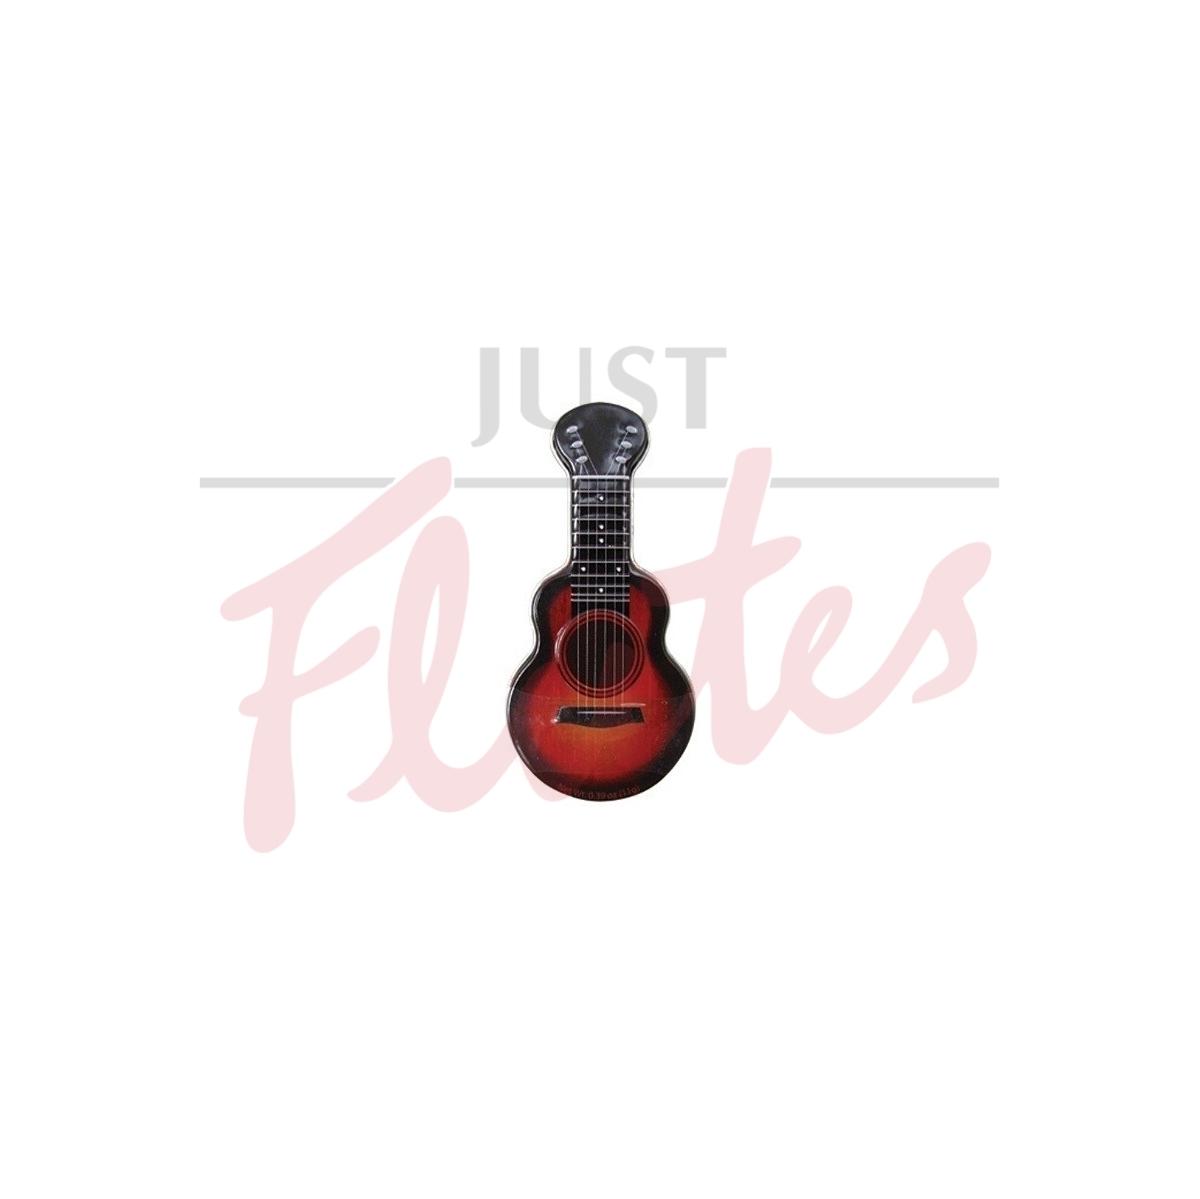 Sugarfree Mints in Acoustic Guitar Shaped Tin